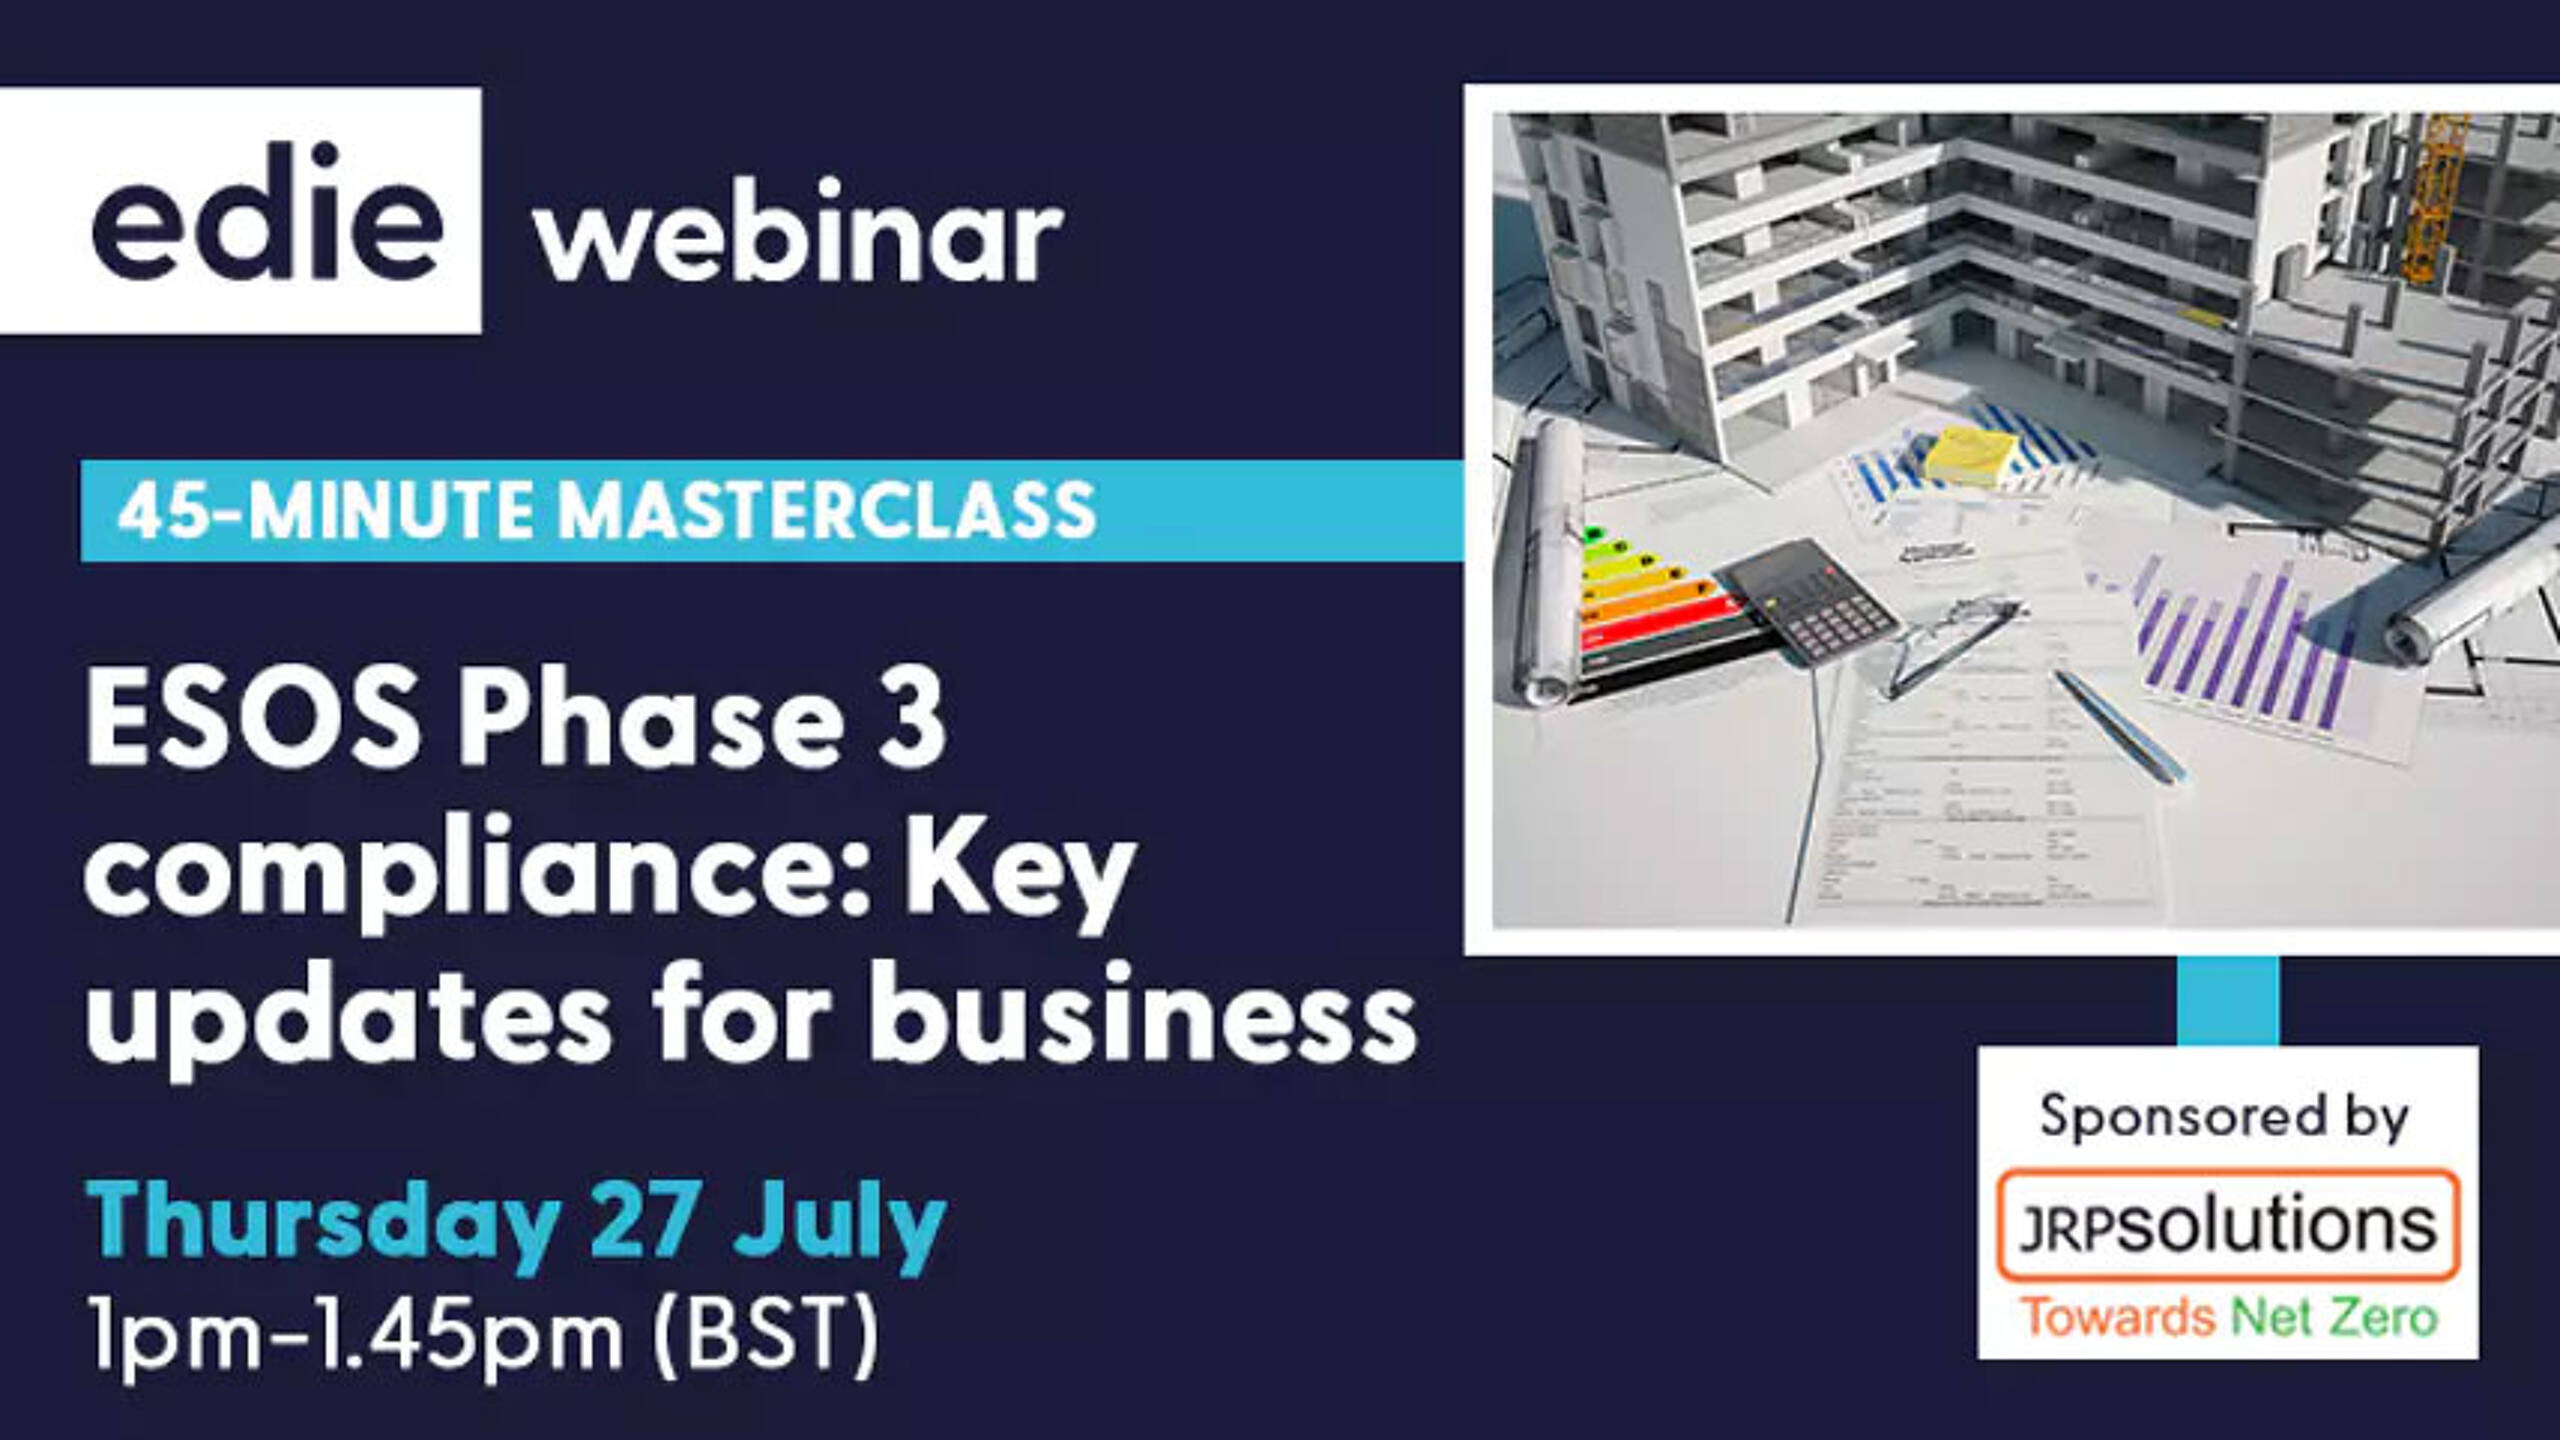 Now available on-demand: edie’s free webinar on ESOS Phase 3